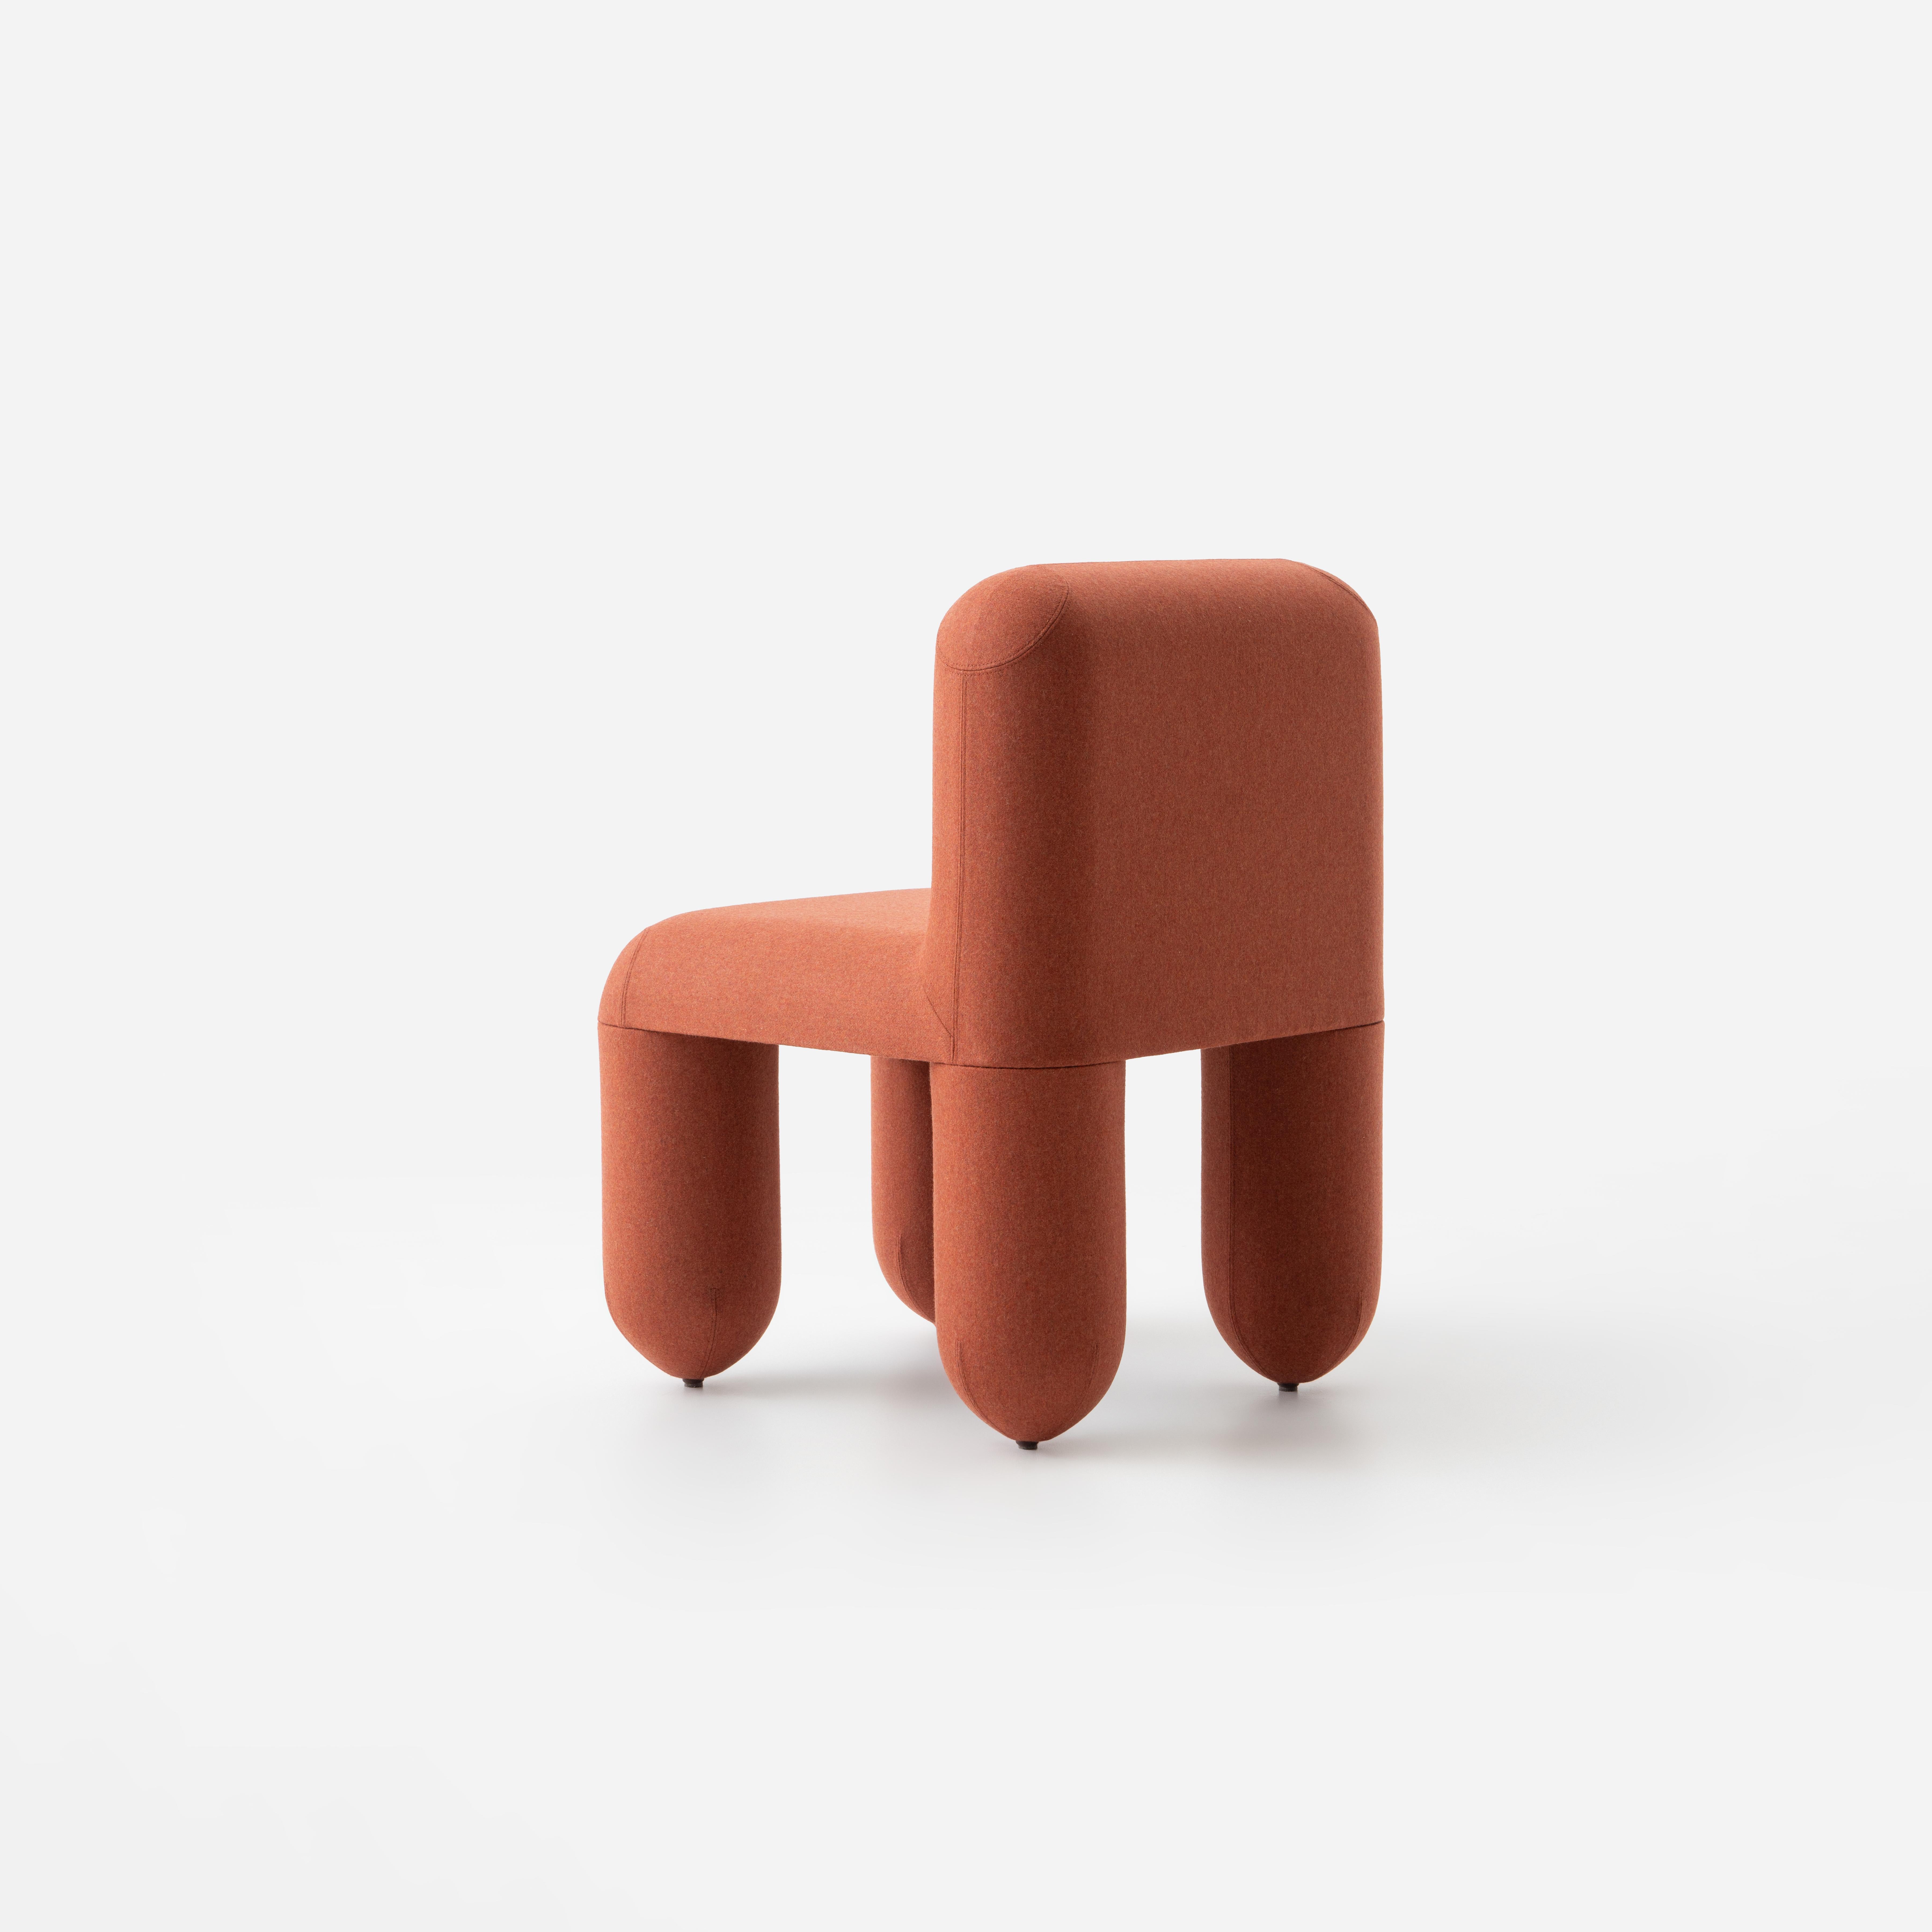 Metal Contemporary Dining Chair 'Hello' by Denys Sokolov x Noom, Orange For Sale